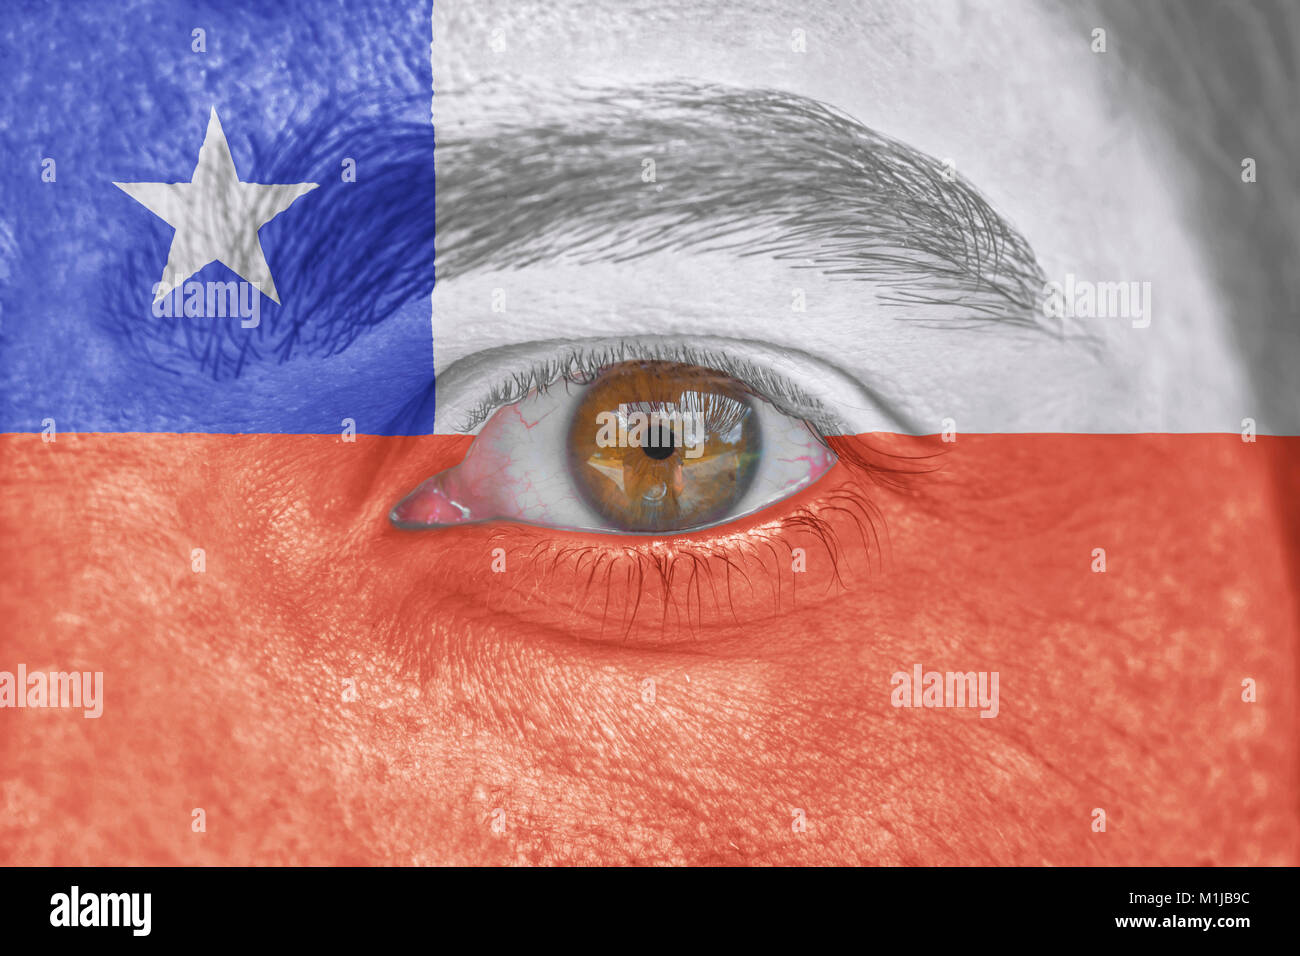 Human face and eye painted with flag of Chile Stock Photo